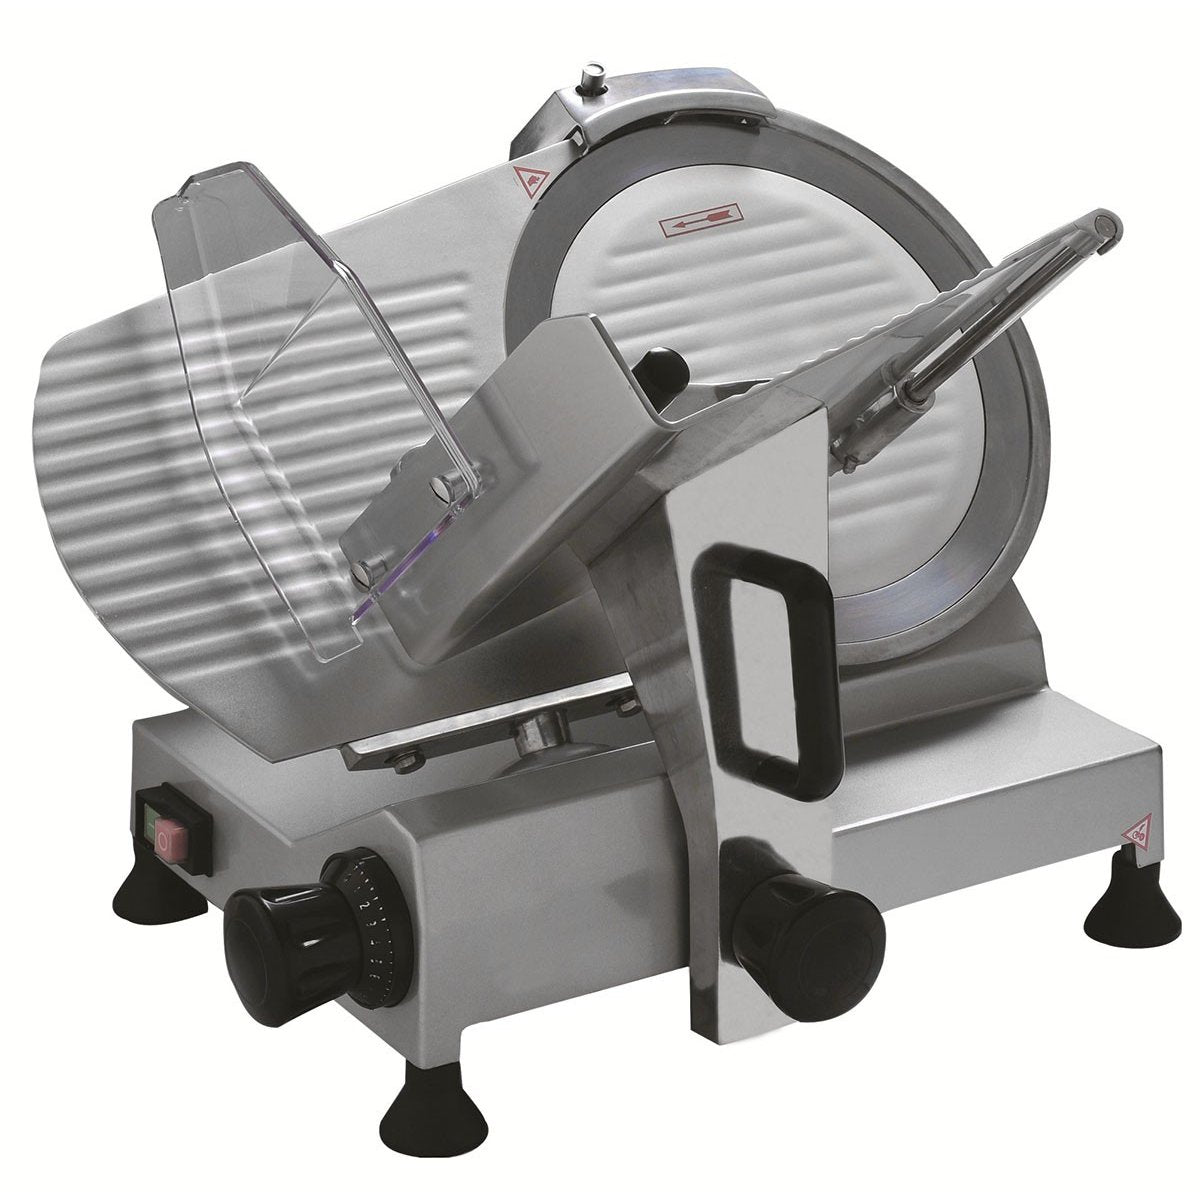 Commercial Meat slicer 10"/250mm Aluminium coated.Product ref:00289.